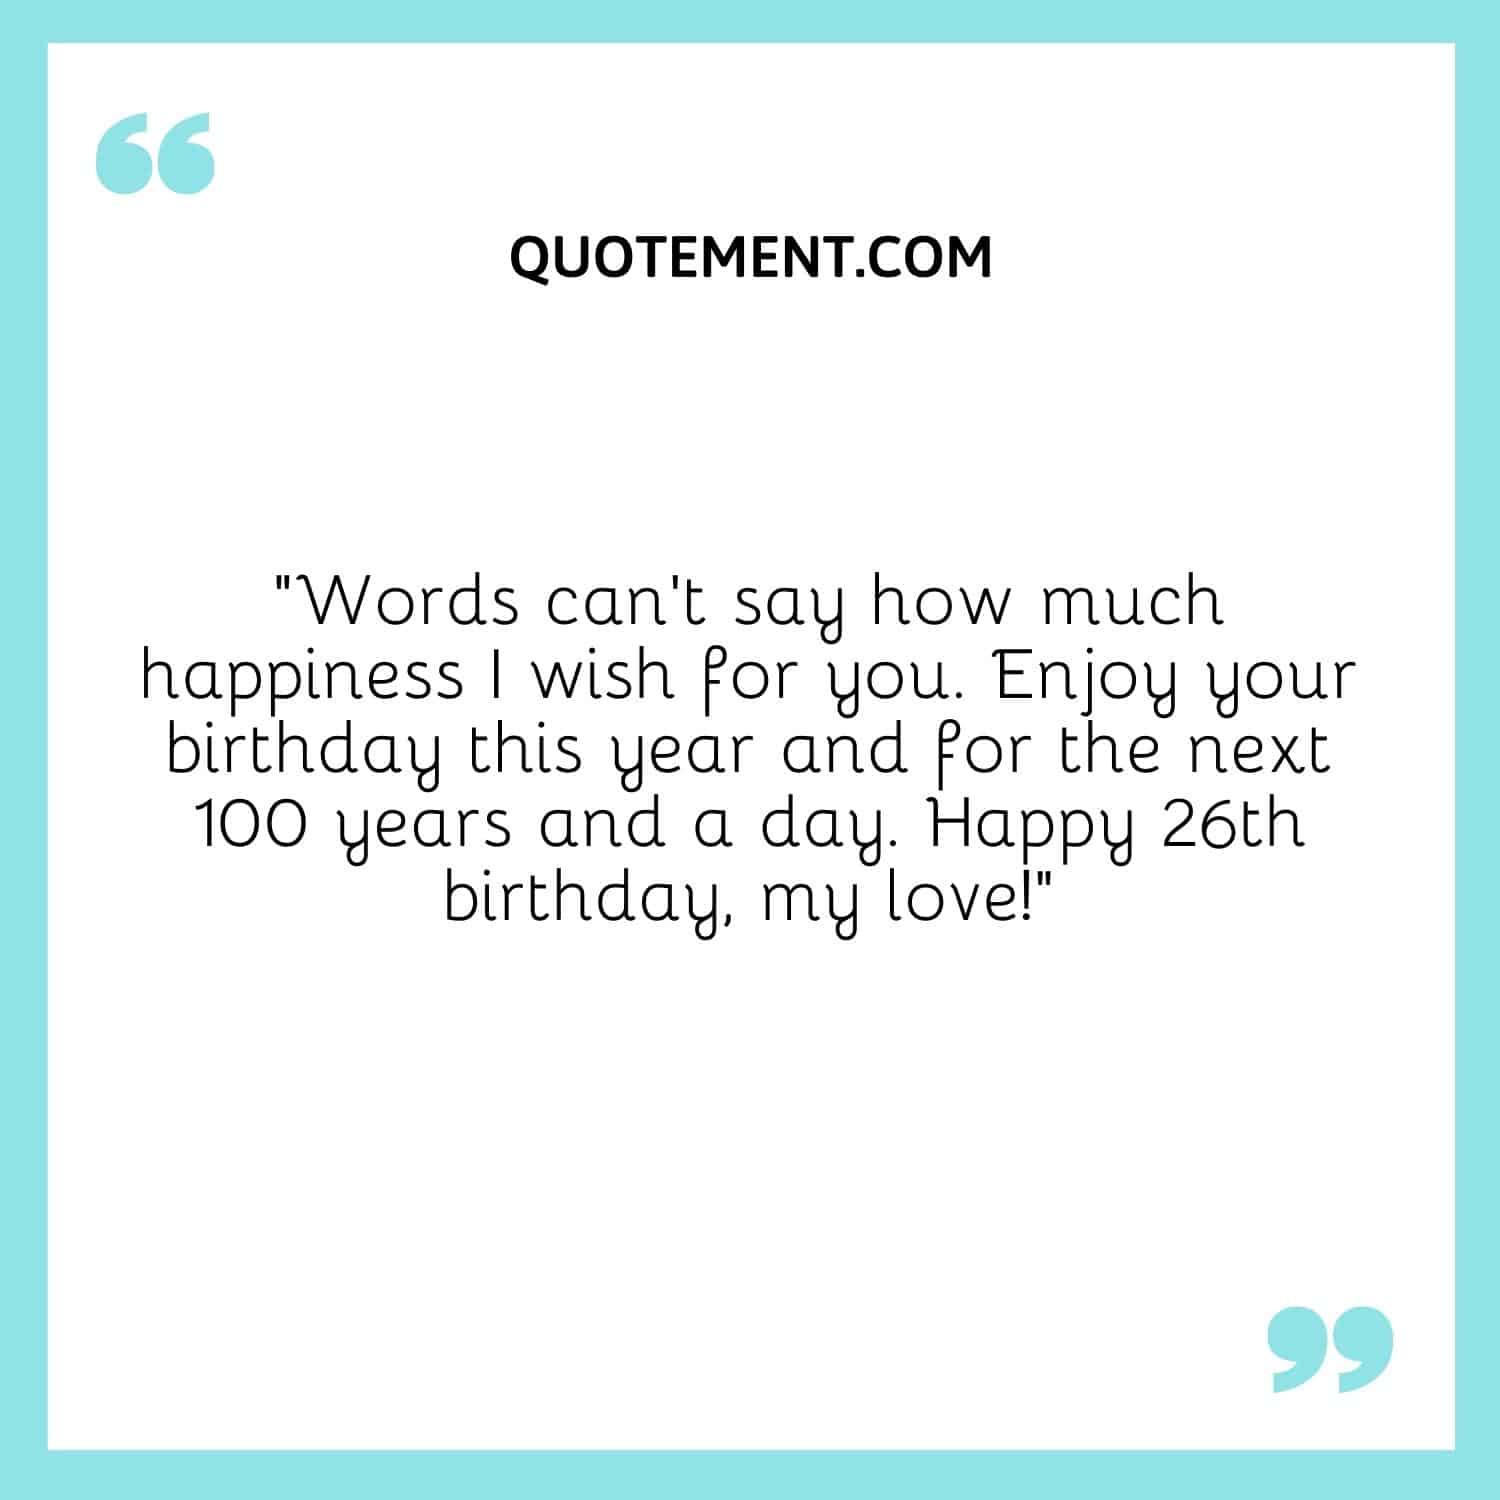 140 Great Happy 26th Birthday Quotes, Wishes & Captions